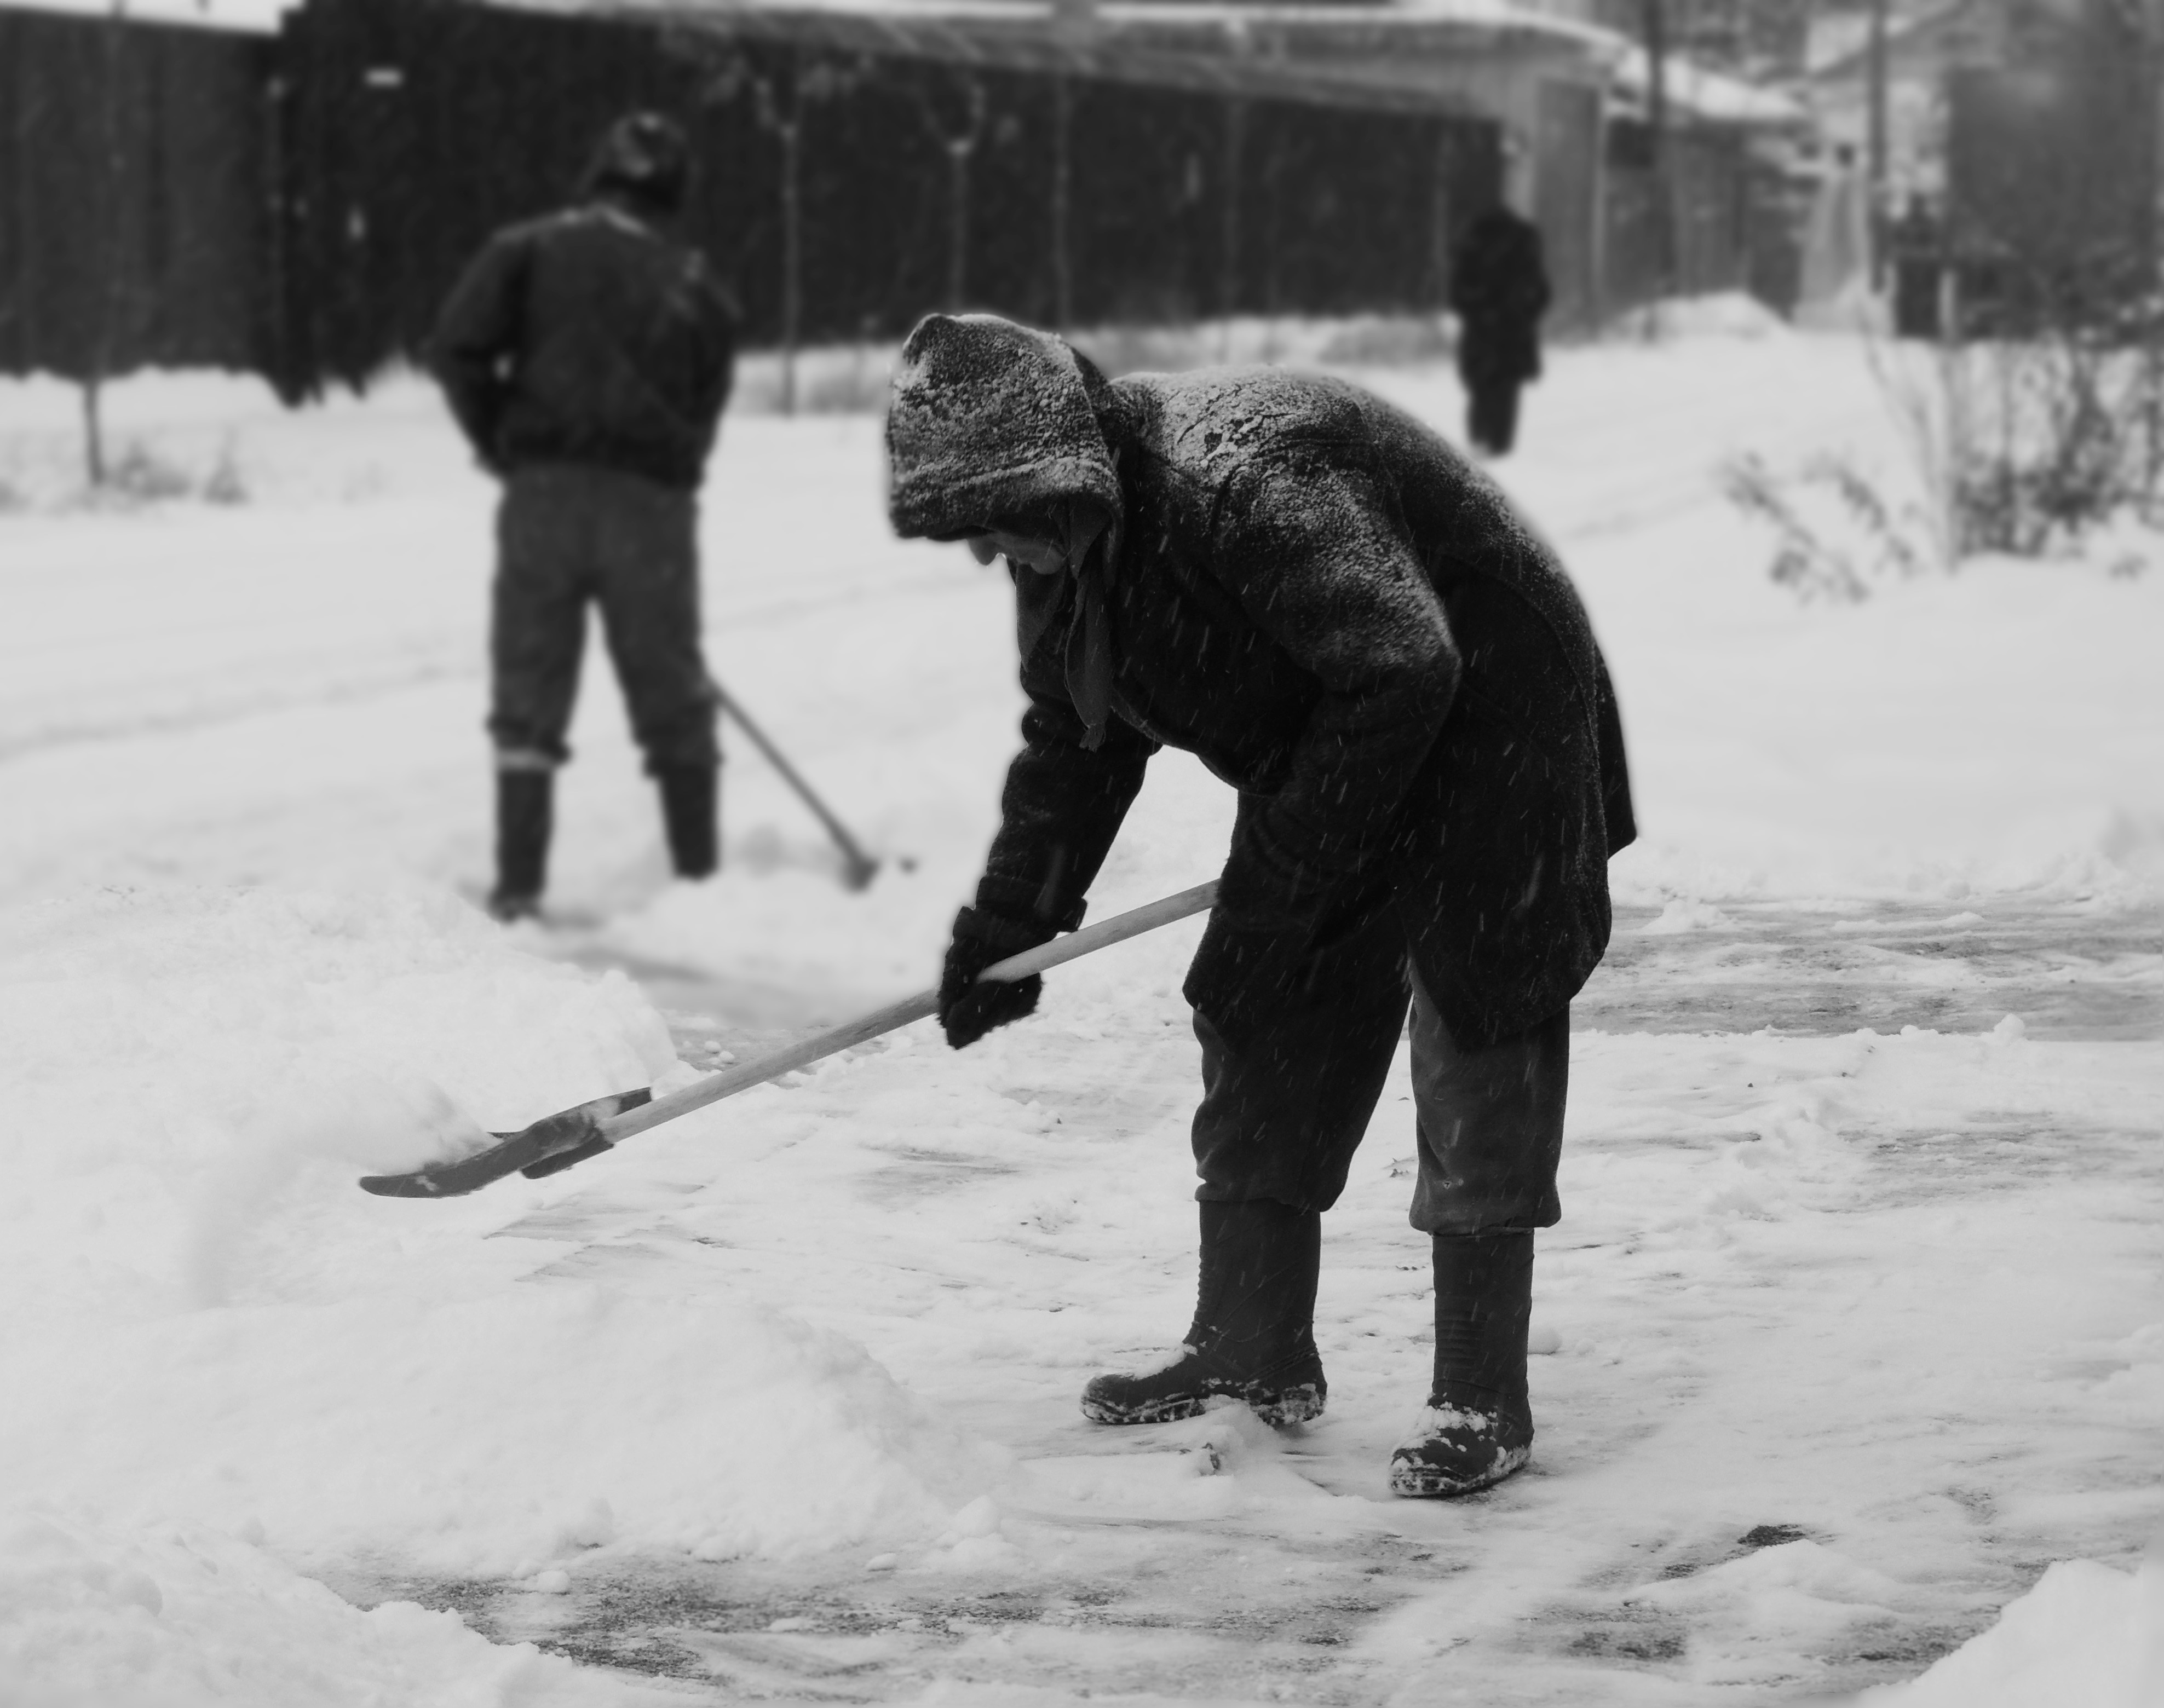 grayscale photography of man shoveling snow